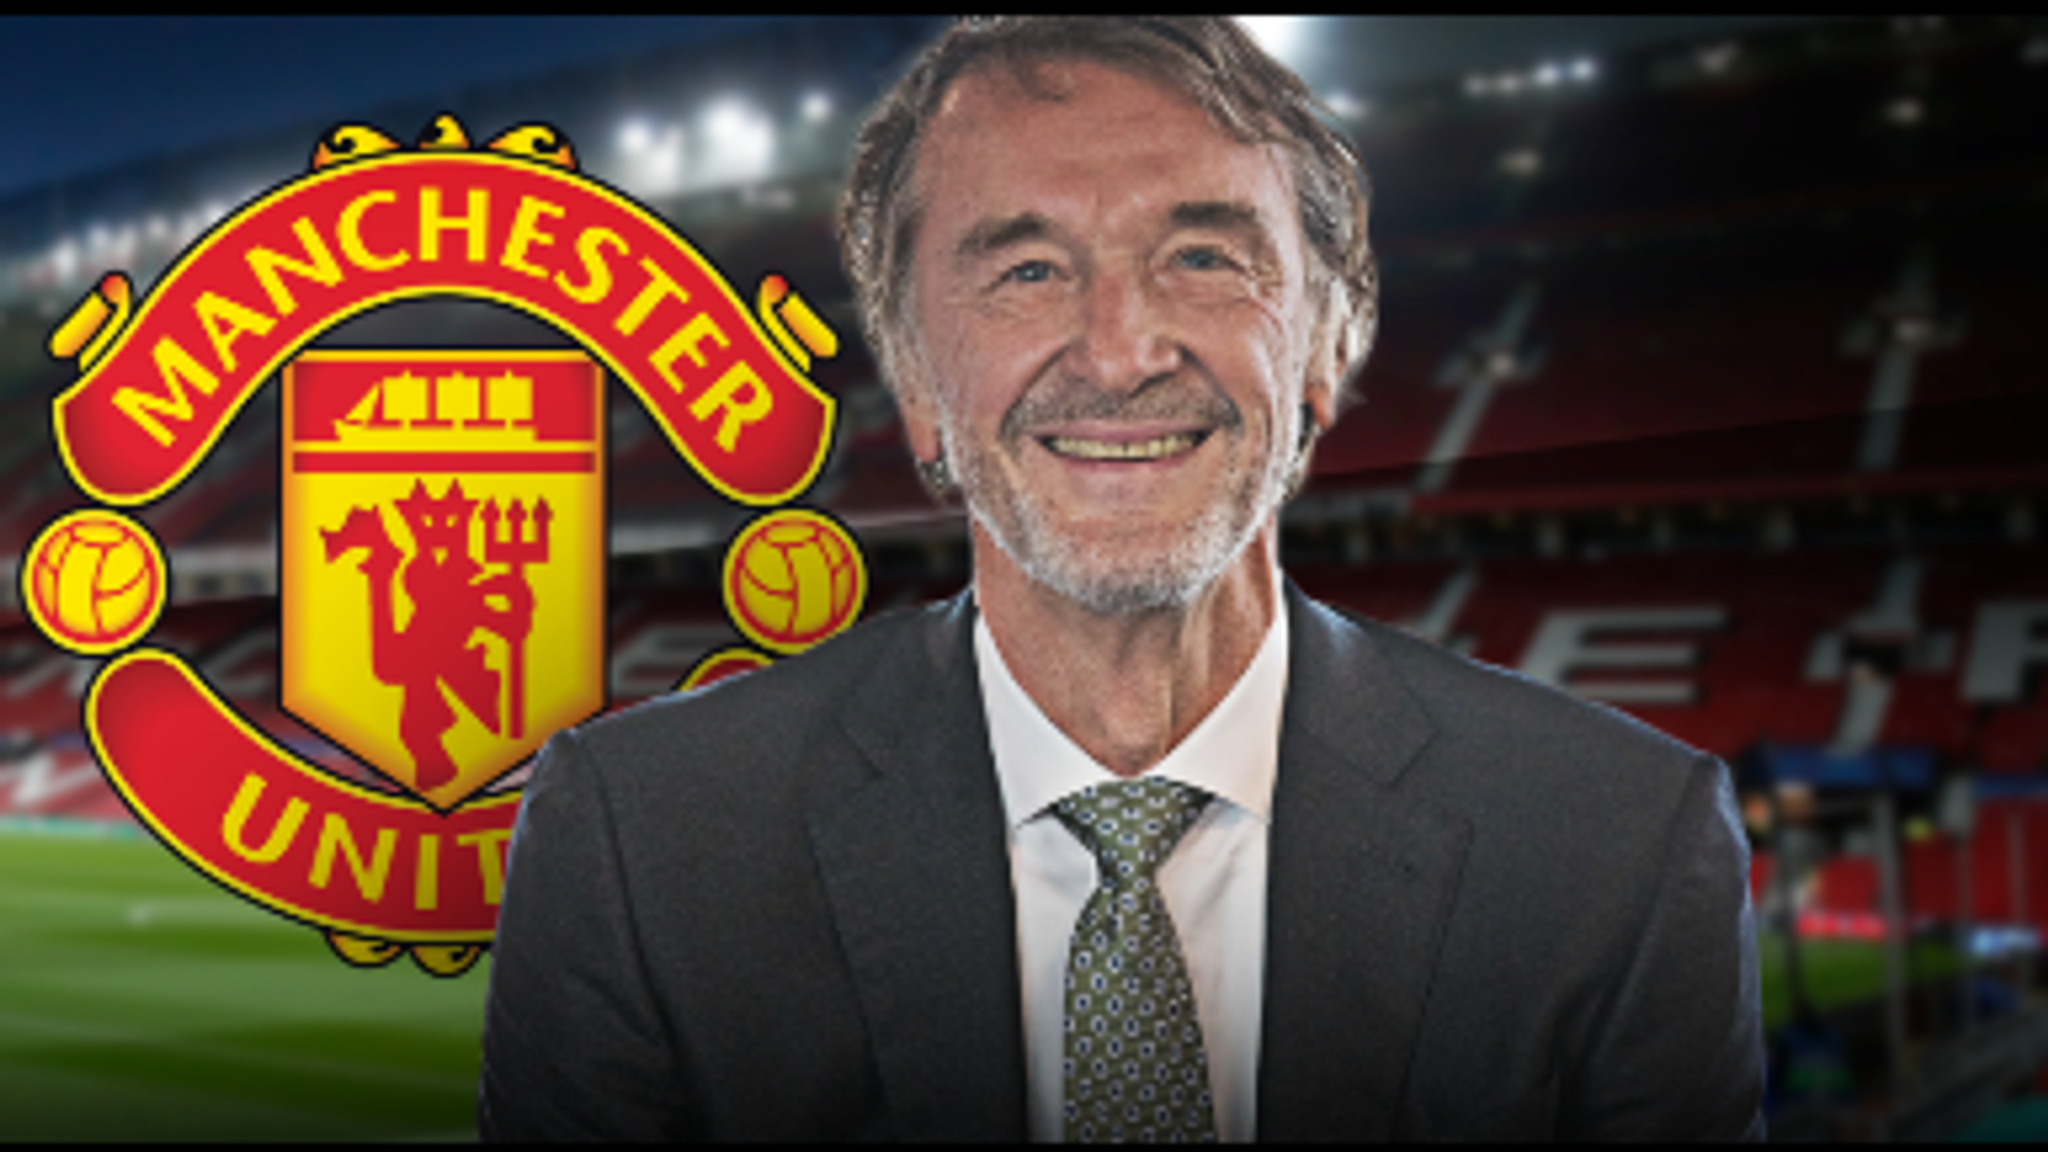 Jim Ratcliffe considering minority stake bid for Manchester United – reports